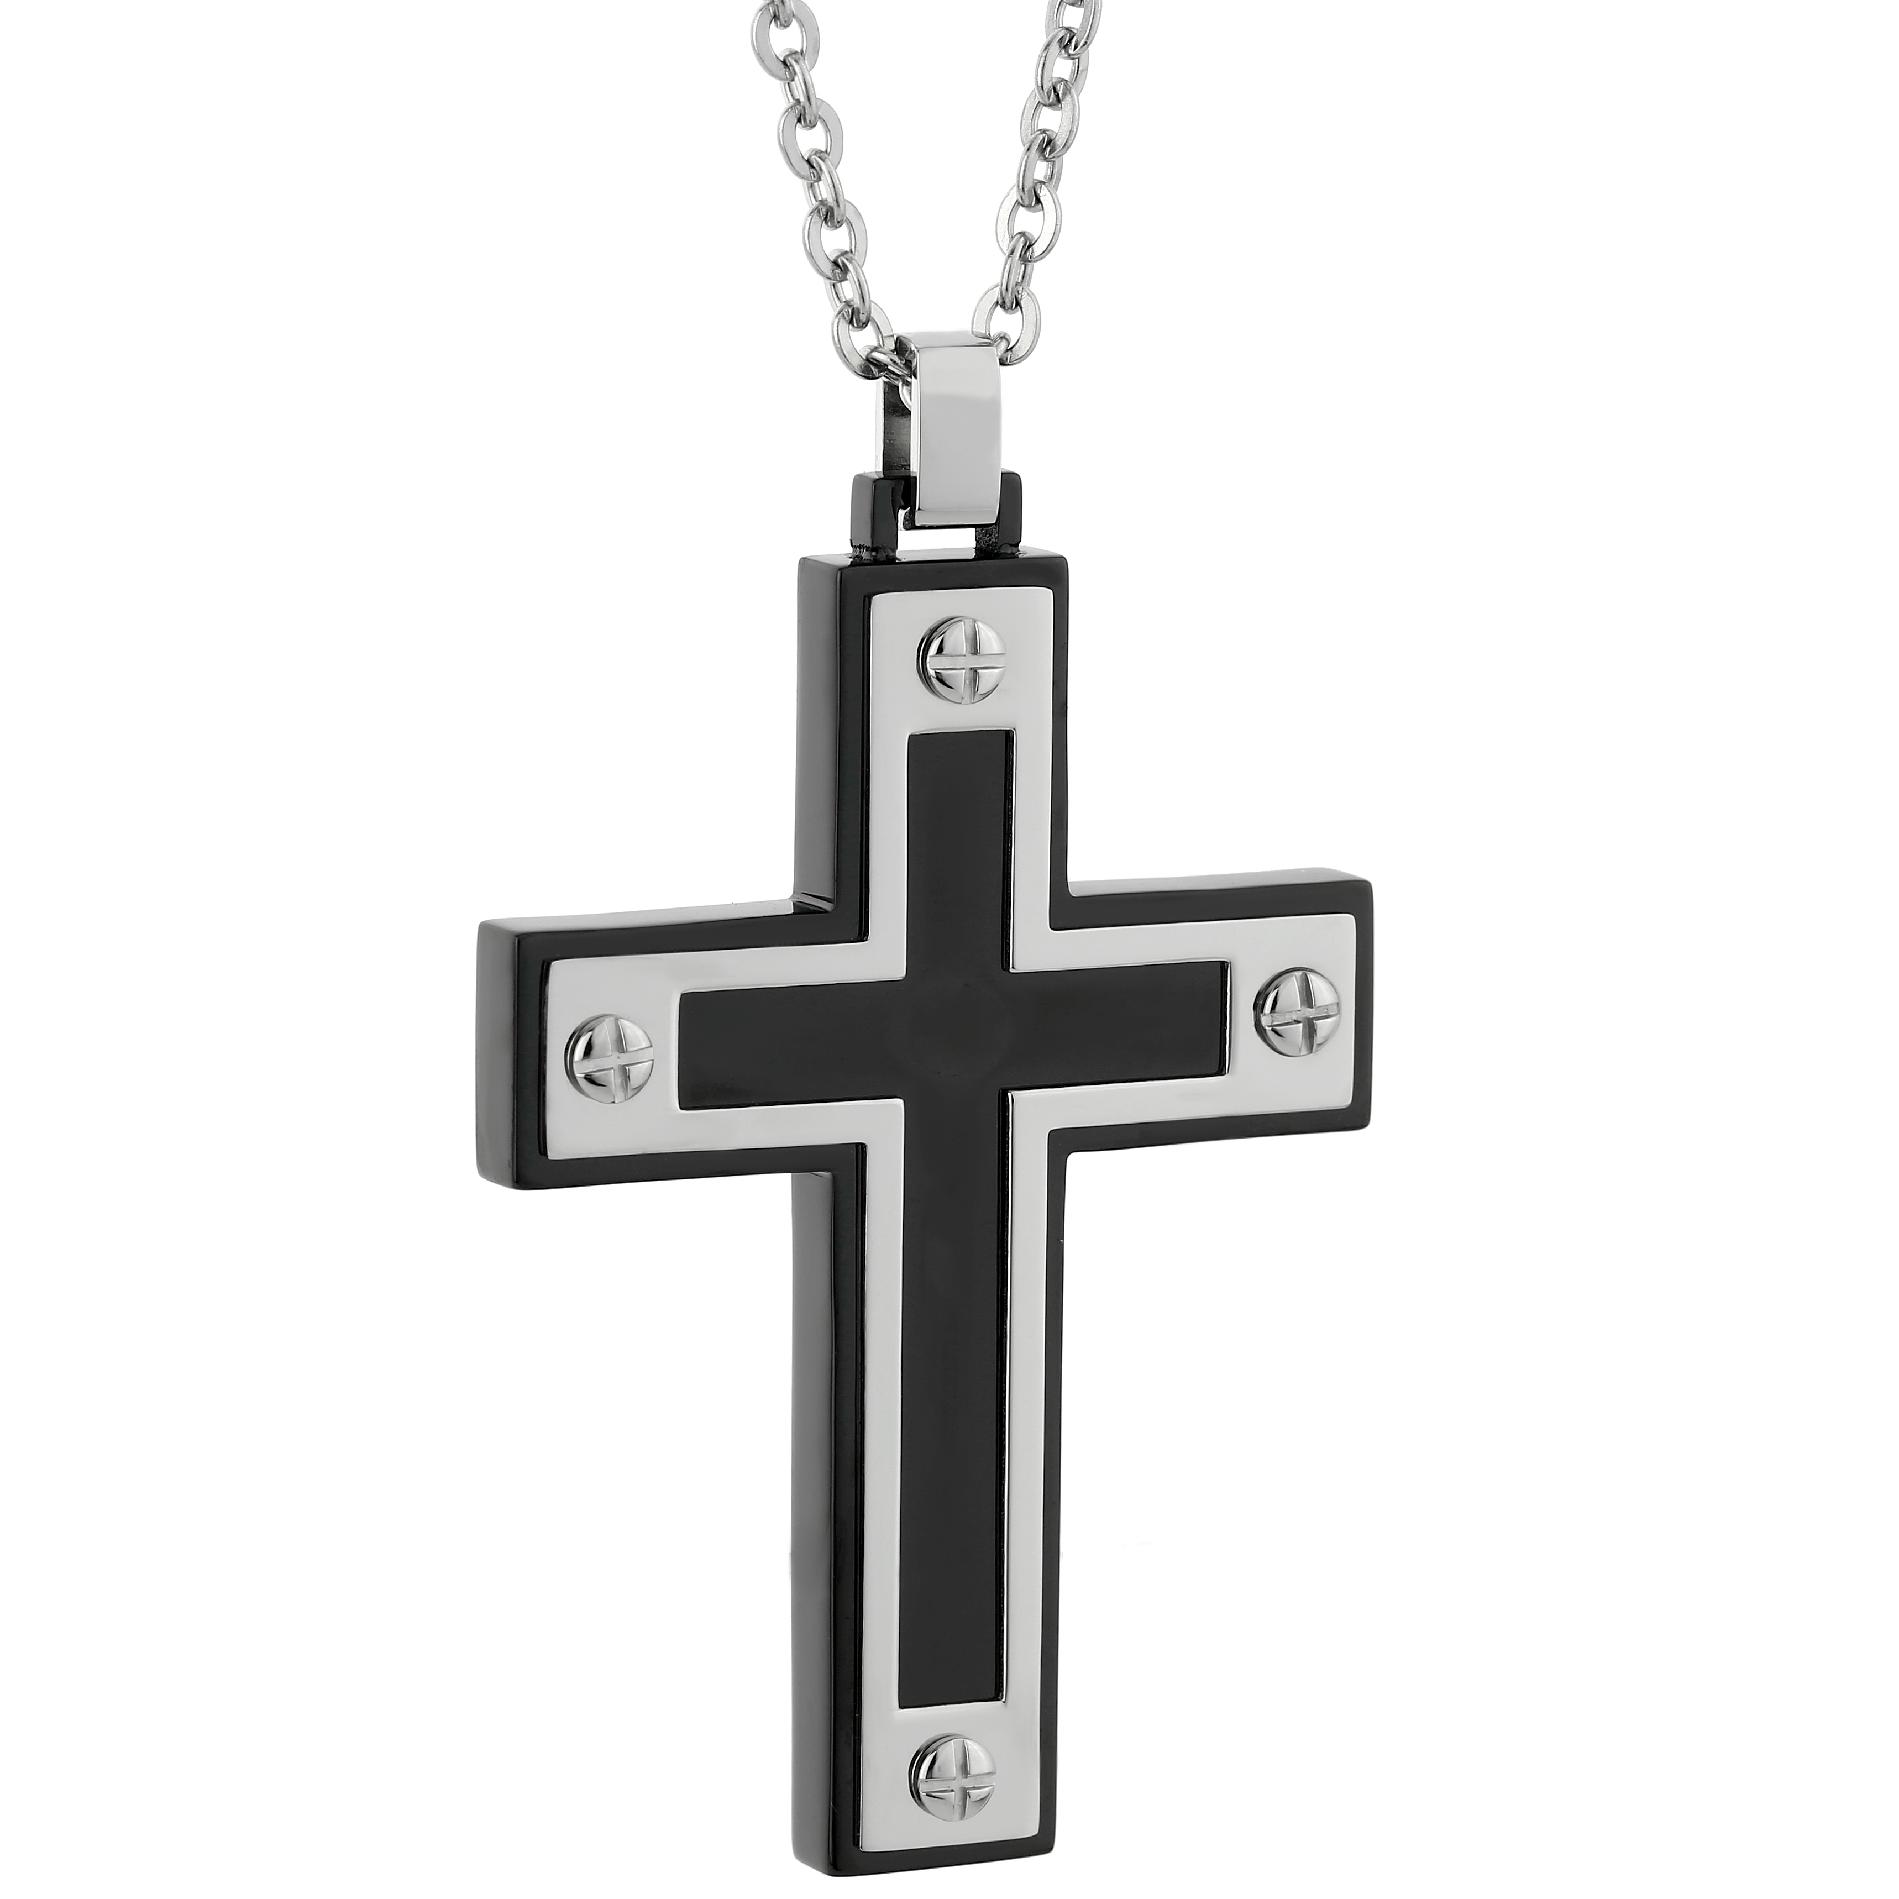 Black IP Stainless Steel Cross Pendant With Screws Accent